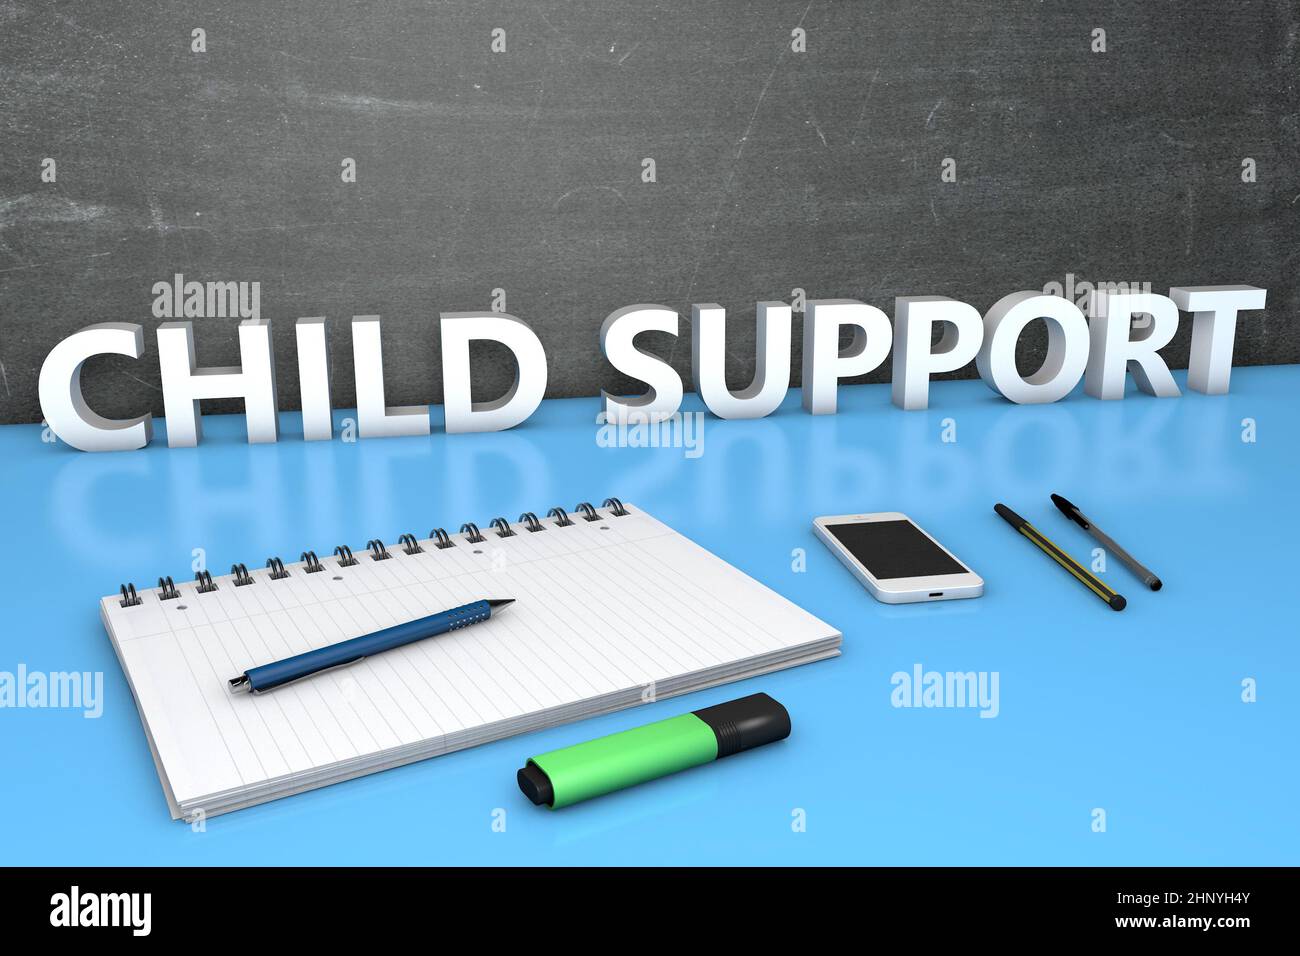 Child Support - text concept with chalkboard, notebook, pens and mobile phone. 3D render illustration. Stock Photo